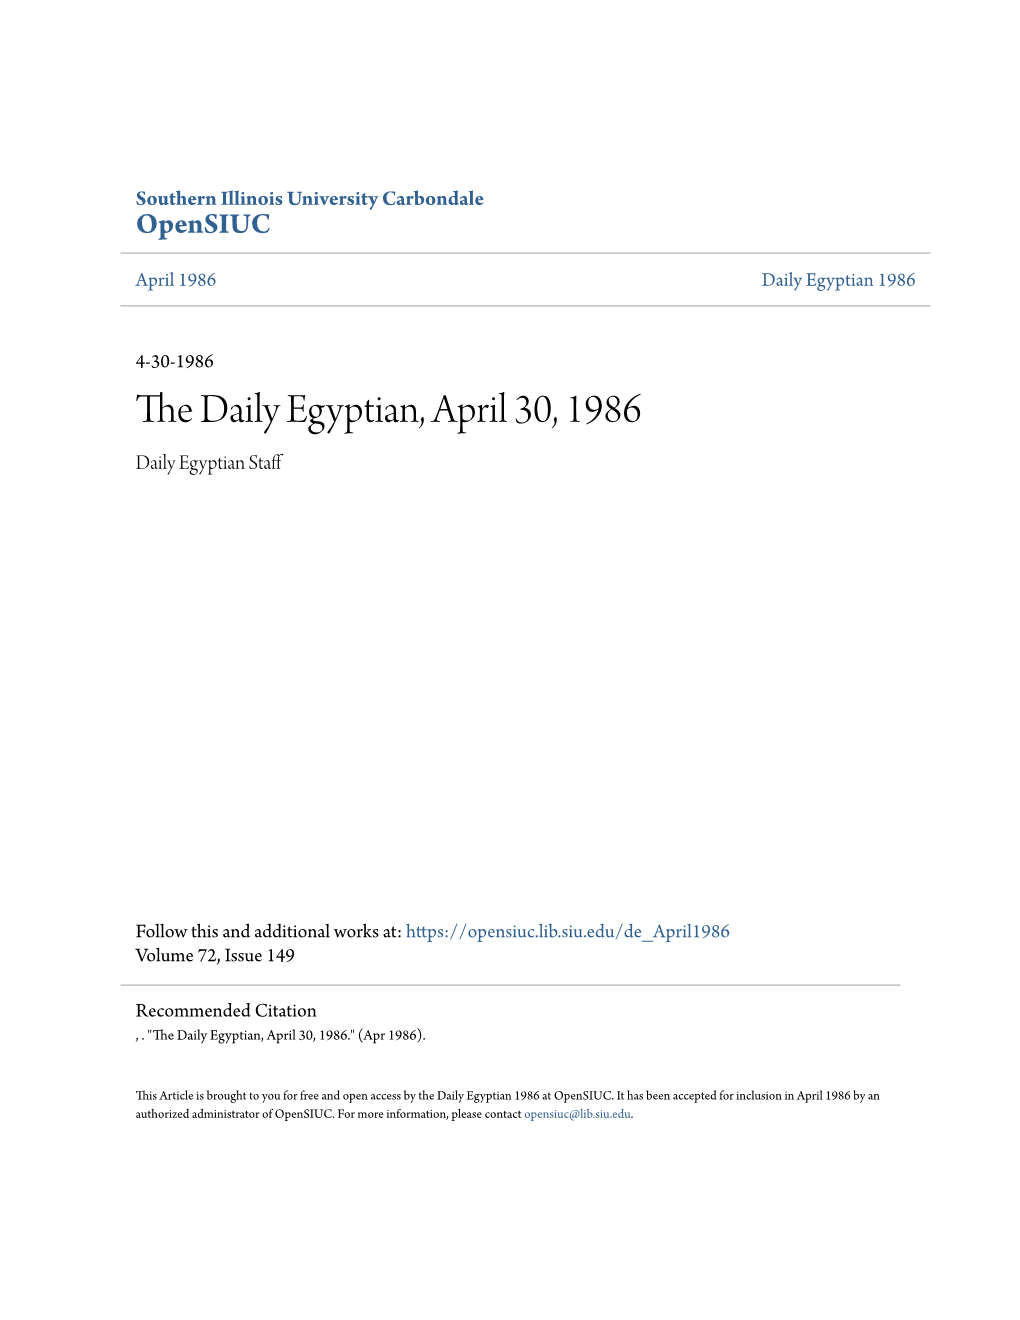 The Daily Egyptian, April 30, 1986